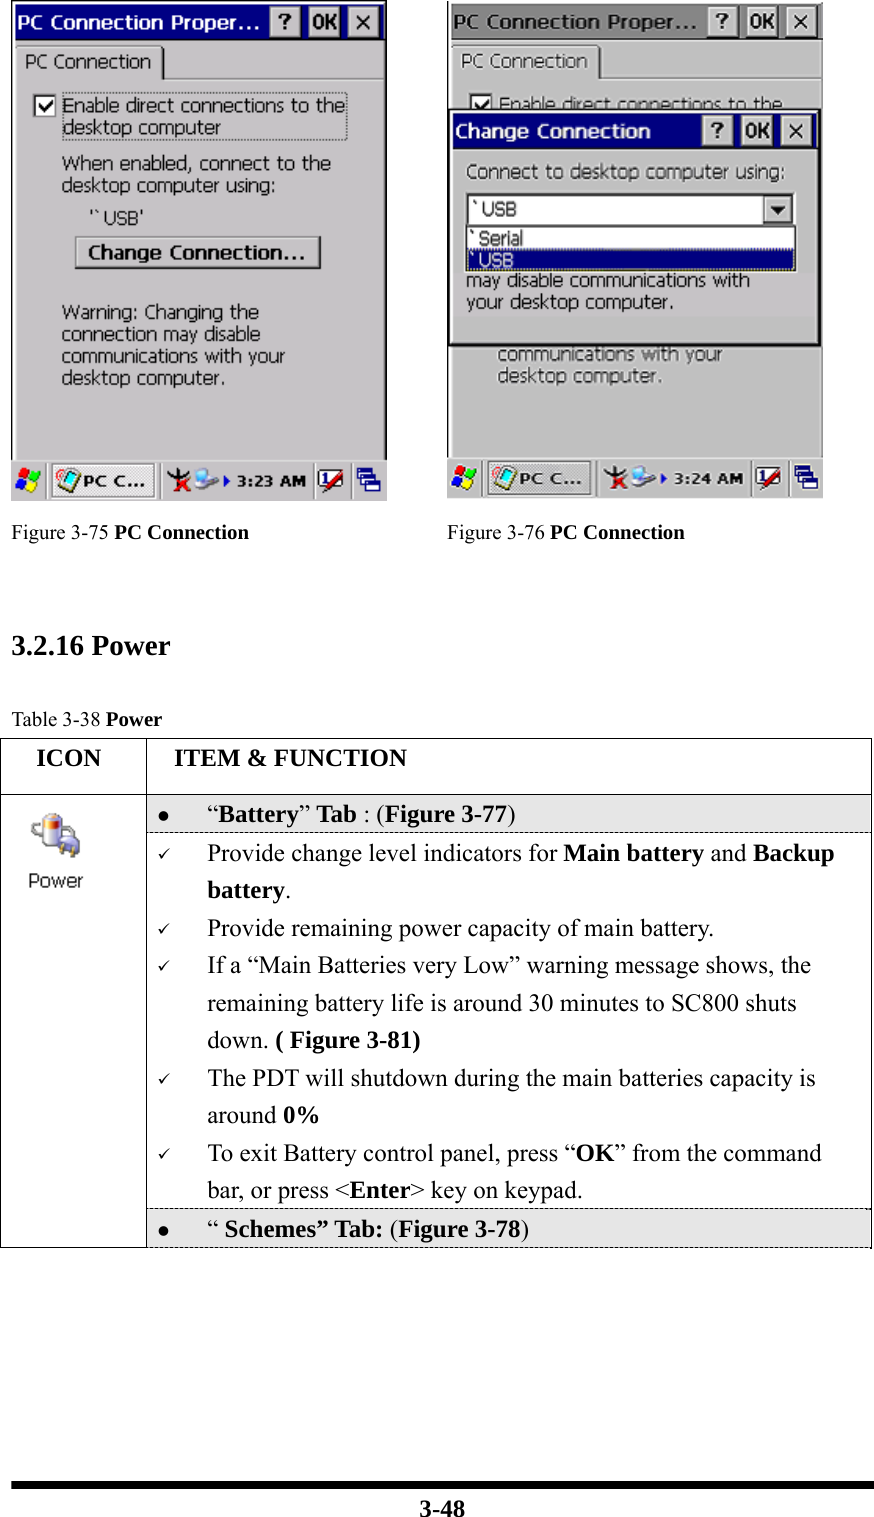  3-48   Figure 3-75 PC Connection Figure 3-76 PC Connection   3.2.16 Power  Table 3-38 Power   ICON   ITEM &amp; FUNCTION z “Battery” Tab : (Figure 3-77) 9 Provide change level indicators for Main battery and Backup battery. 9 Provide remaining power capacity of main battery. 9 If a “Main Batteries very Low” warning message shows, the remaining battery life is around 30 minutes to SC800 shuts down. ( Figure 3-81) 9 The PDT will shutdown during the main batteries capacity is around 0% 9 To exit Battery control panel, press “OK” from the command bar, or press &lt;Enter&gt; key on keypad.  z “ Schemes” Tab: (Figure 3-78) 